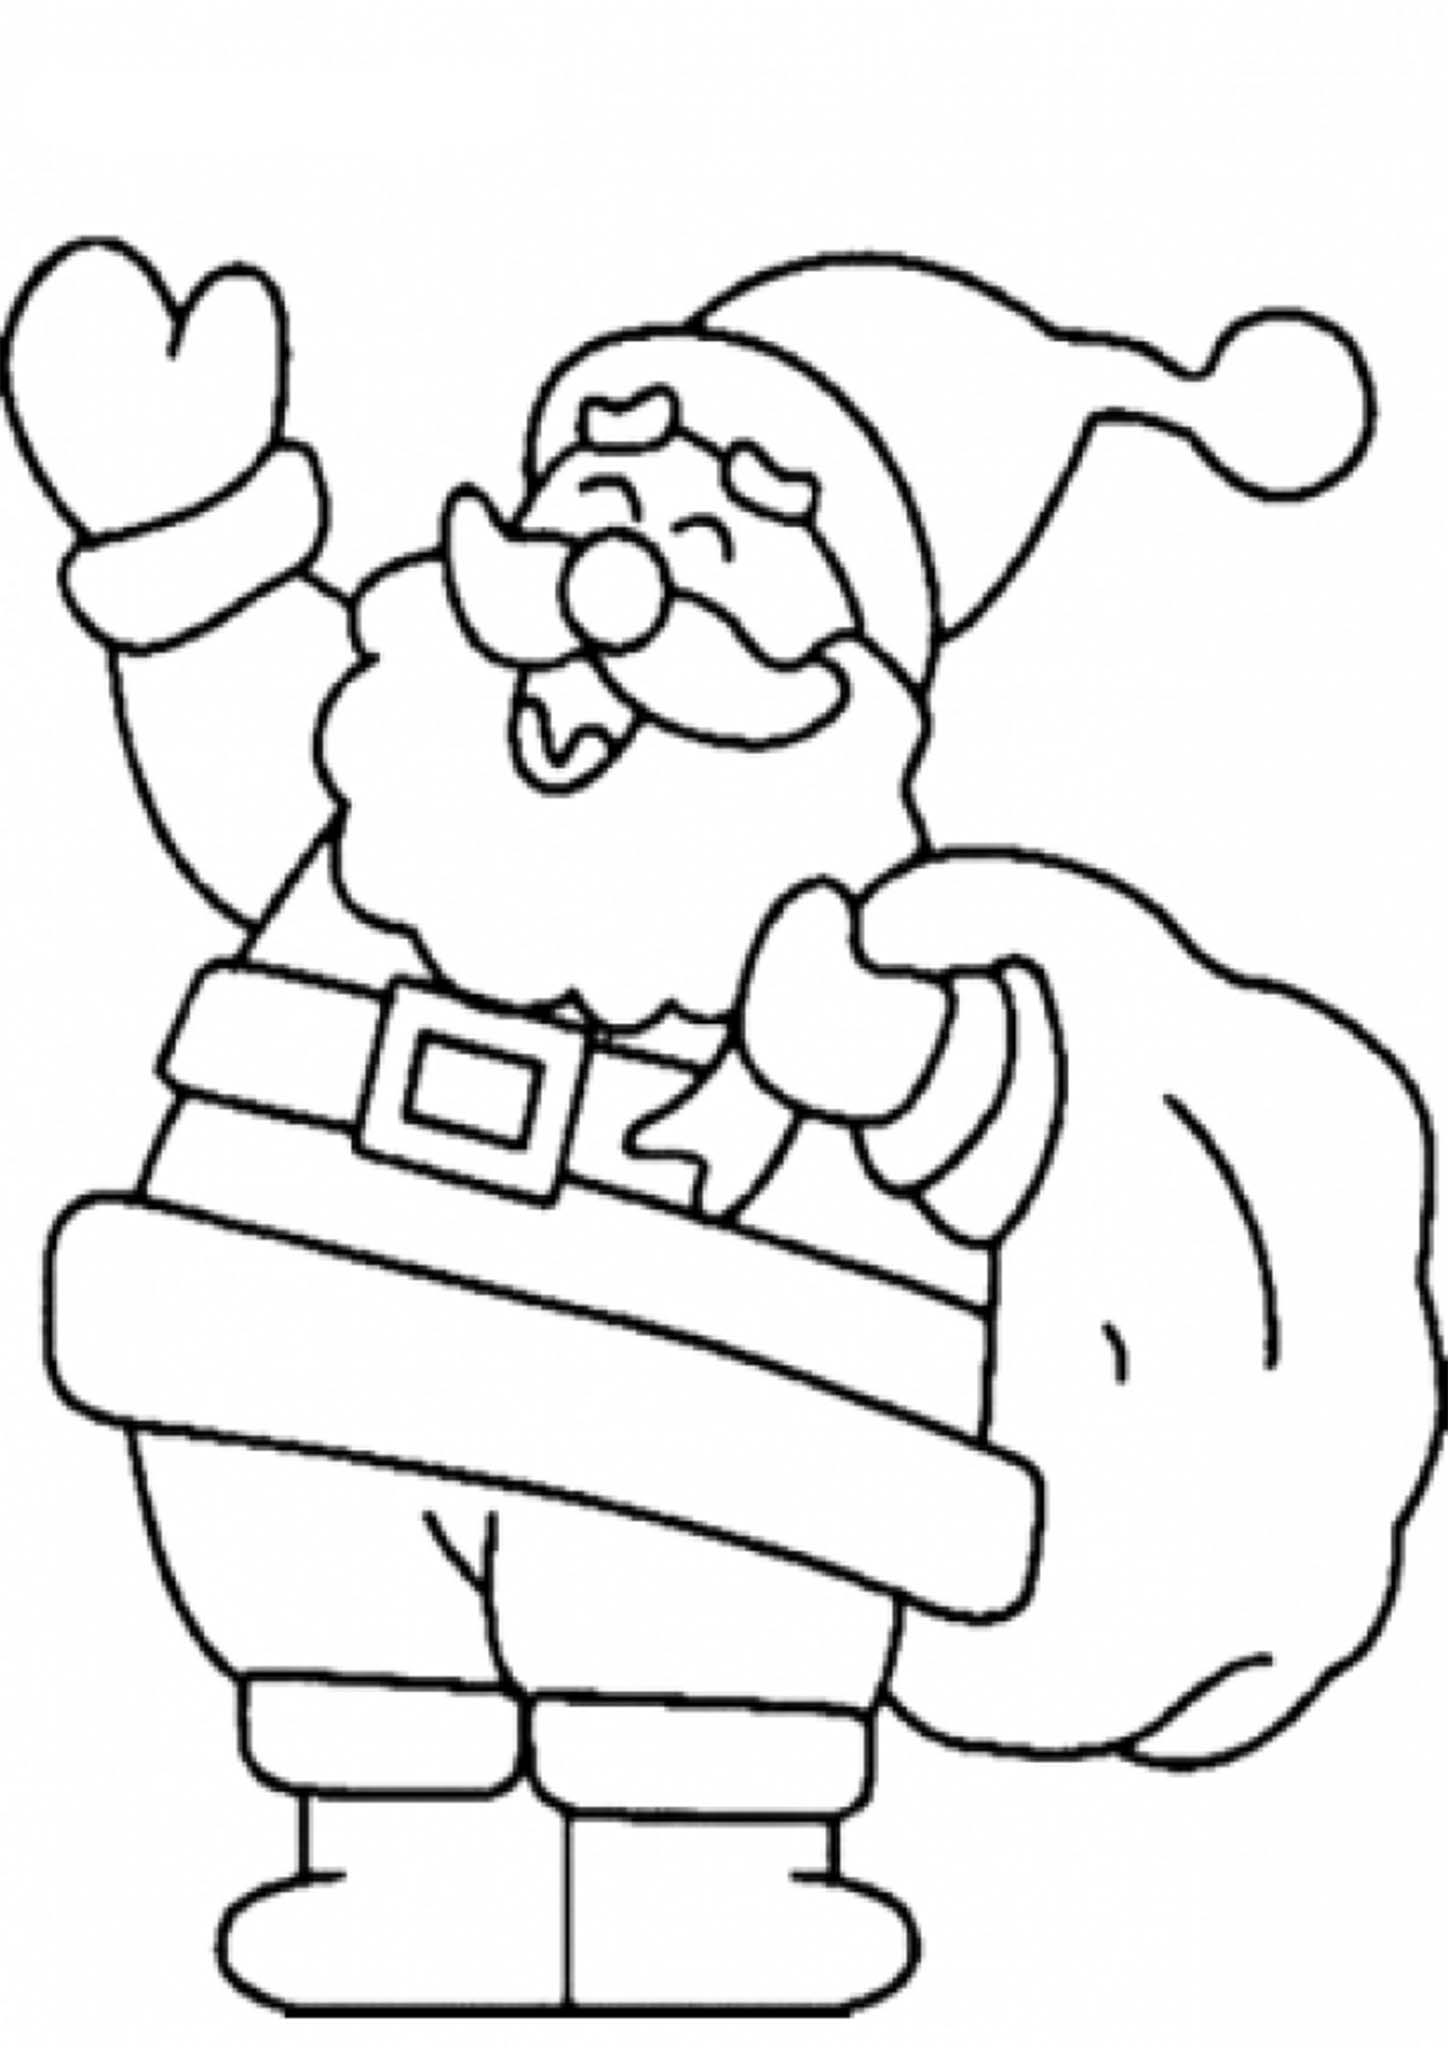 Letter For Santa Coloring Page